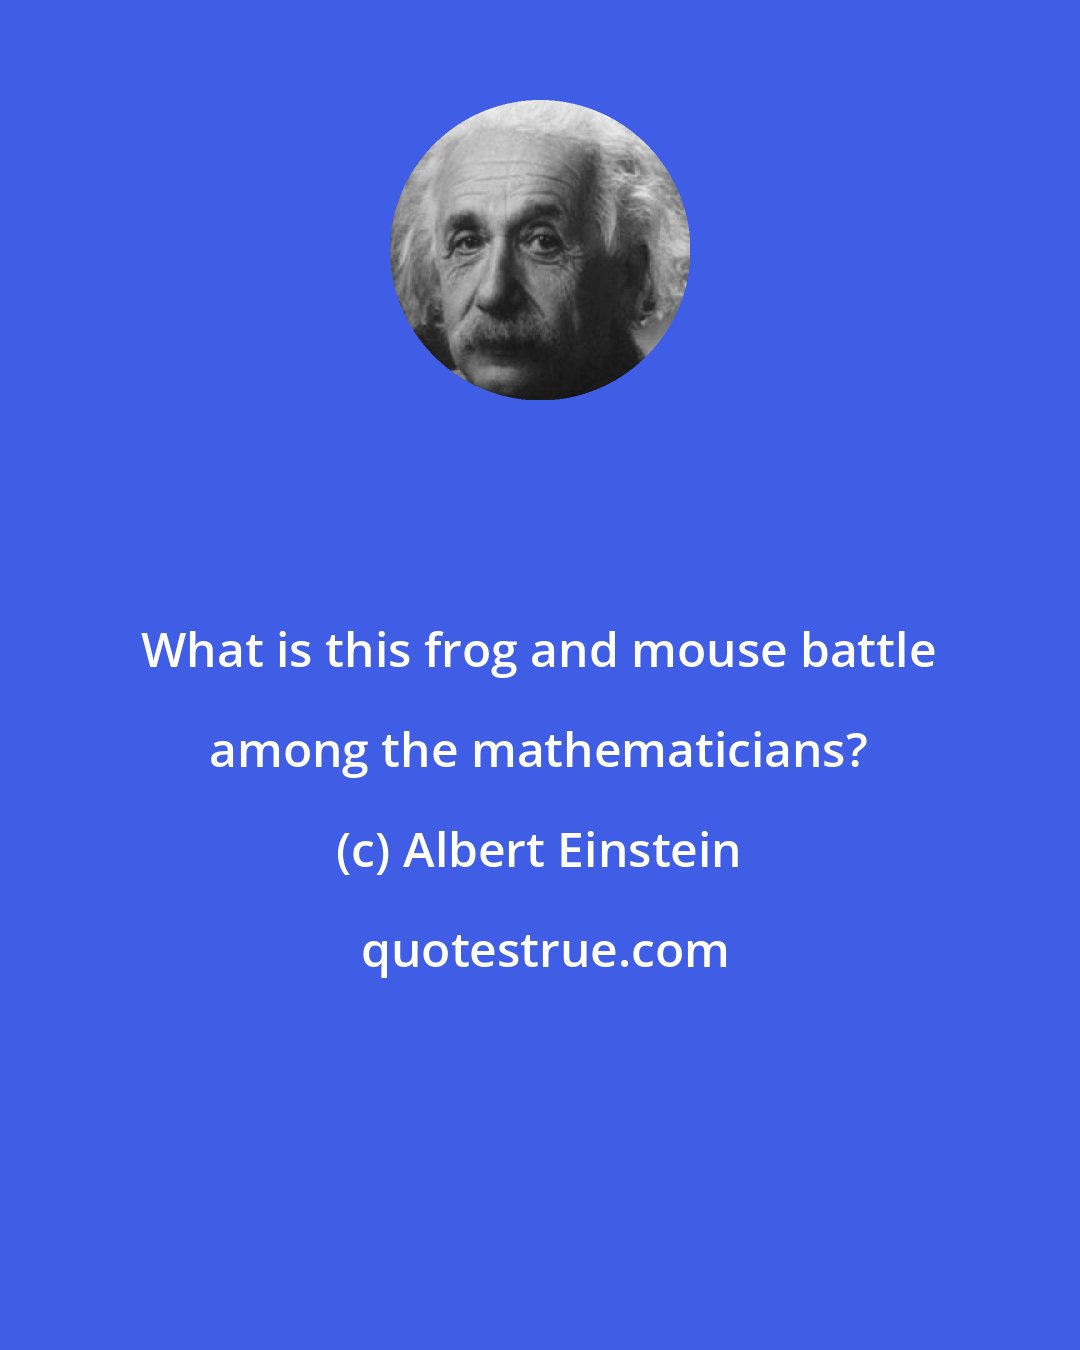 Albert Einstein: What is this frog and mouse battle among the mathematicians?